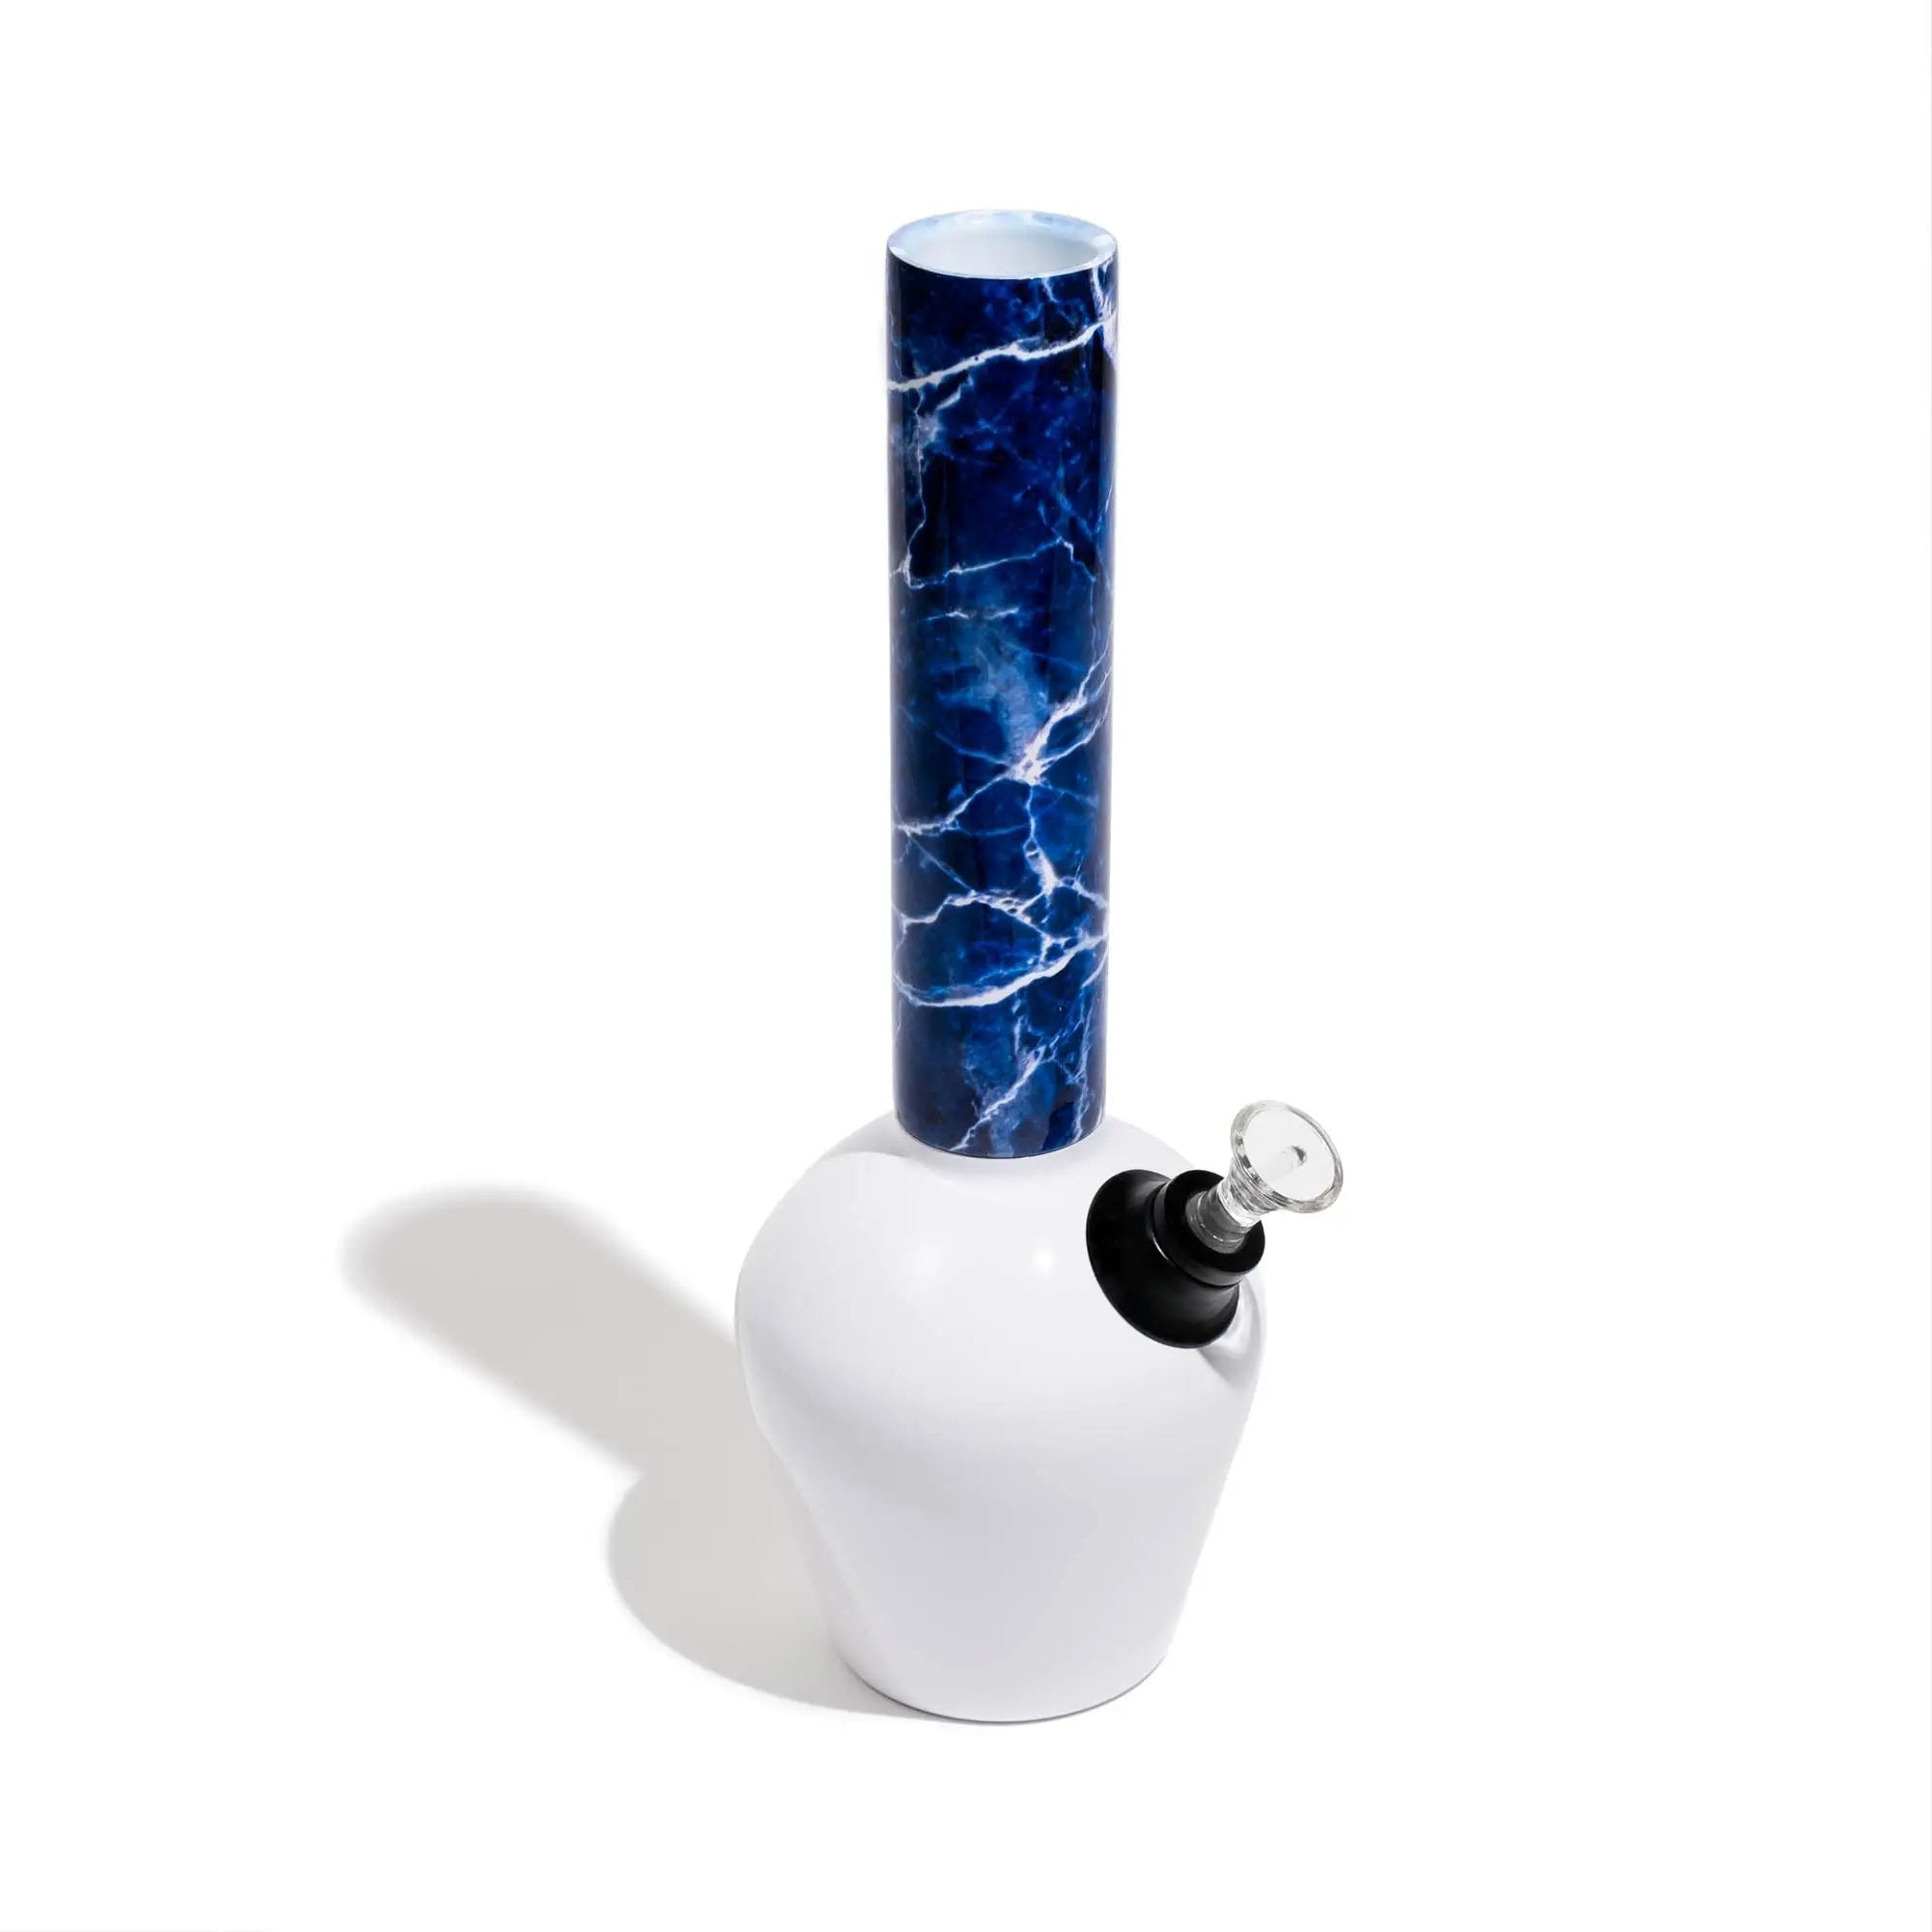 Chill - Mix & Match Series - Blue Marble Neckpiece by Chill Steel Pipes